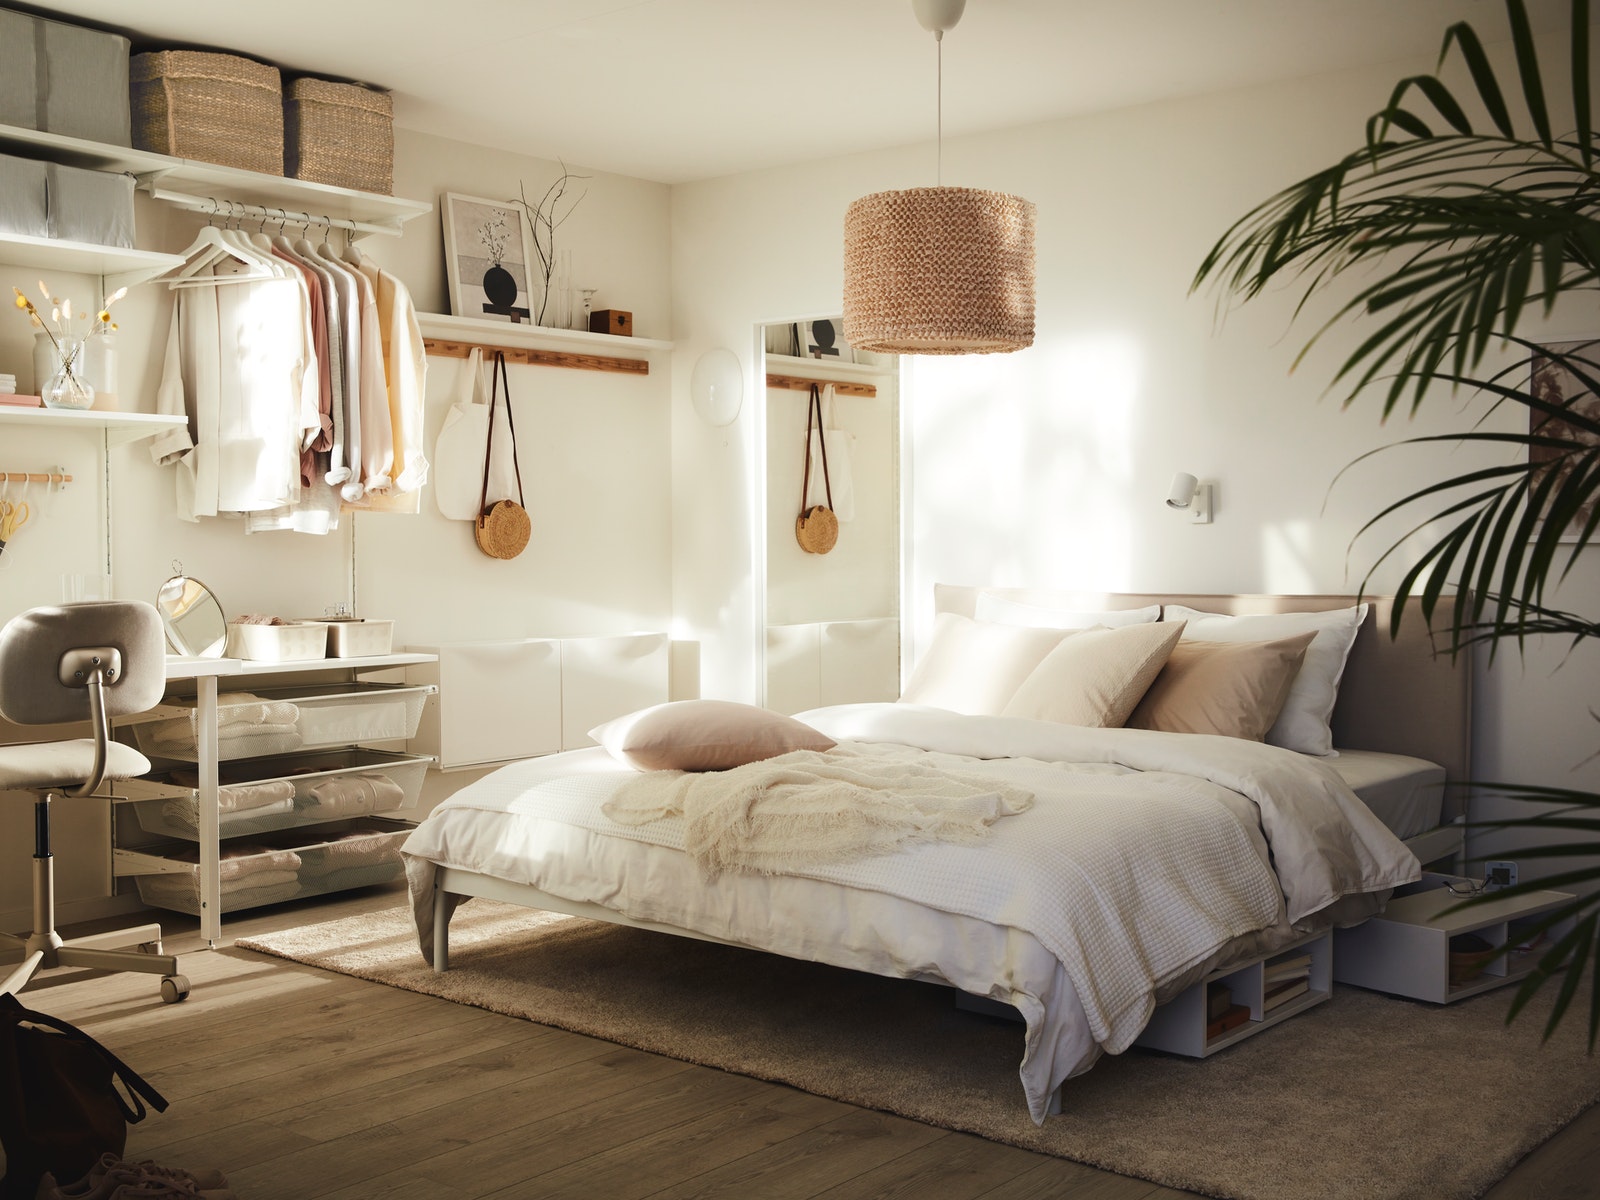 IKEA - Your small, calm and organised bedroom